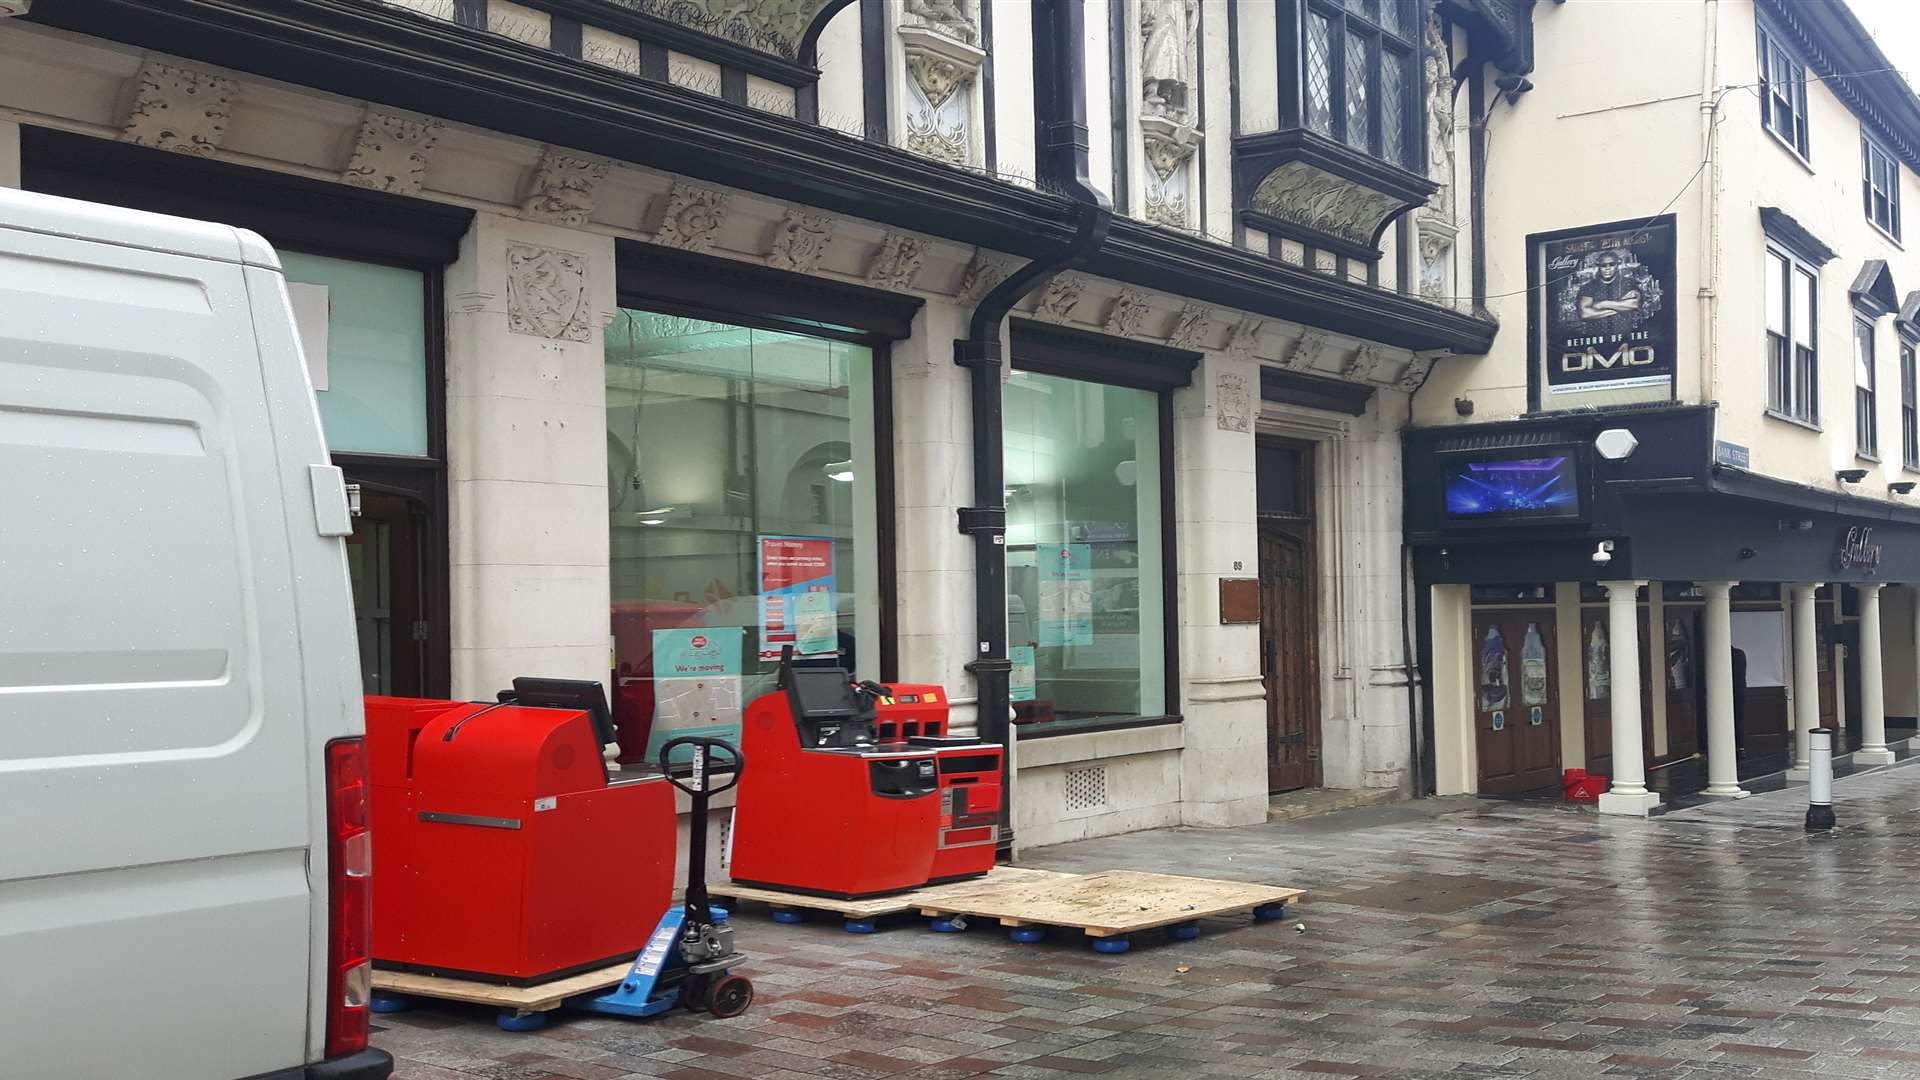 The equipment is being moved out of the former post office building